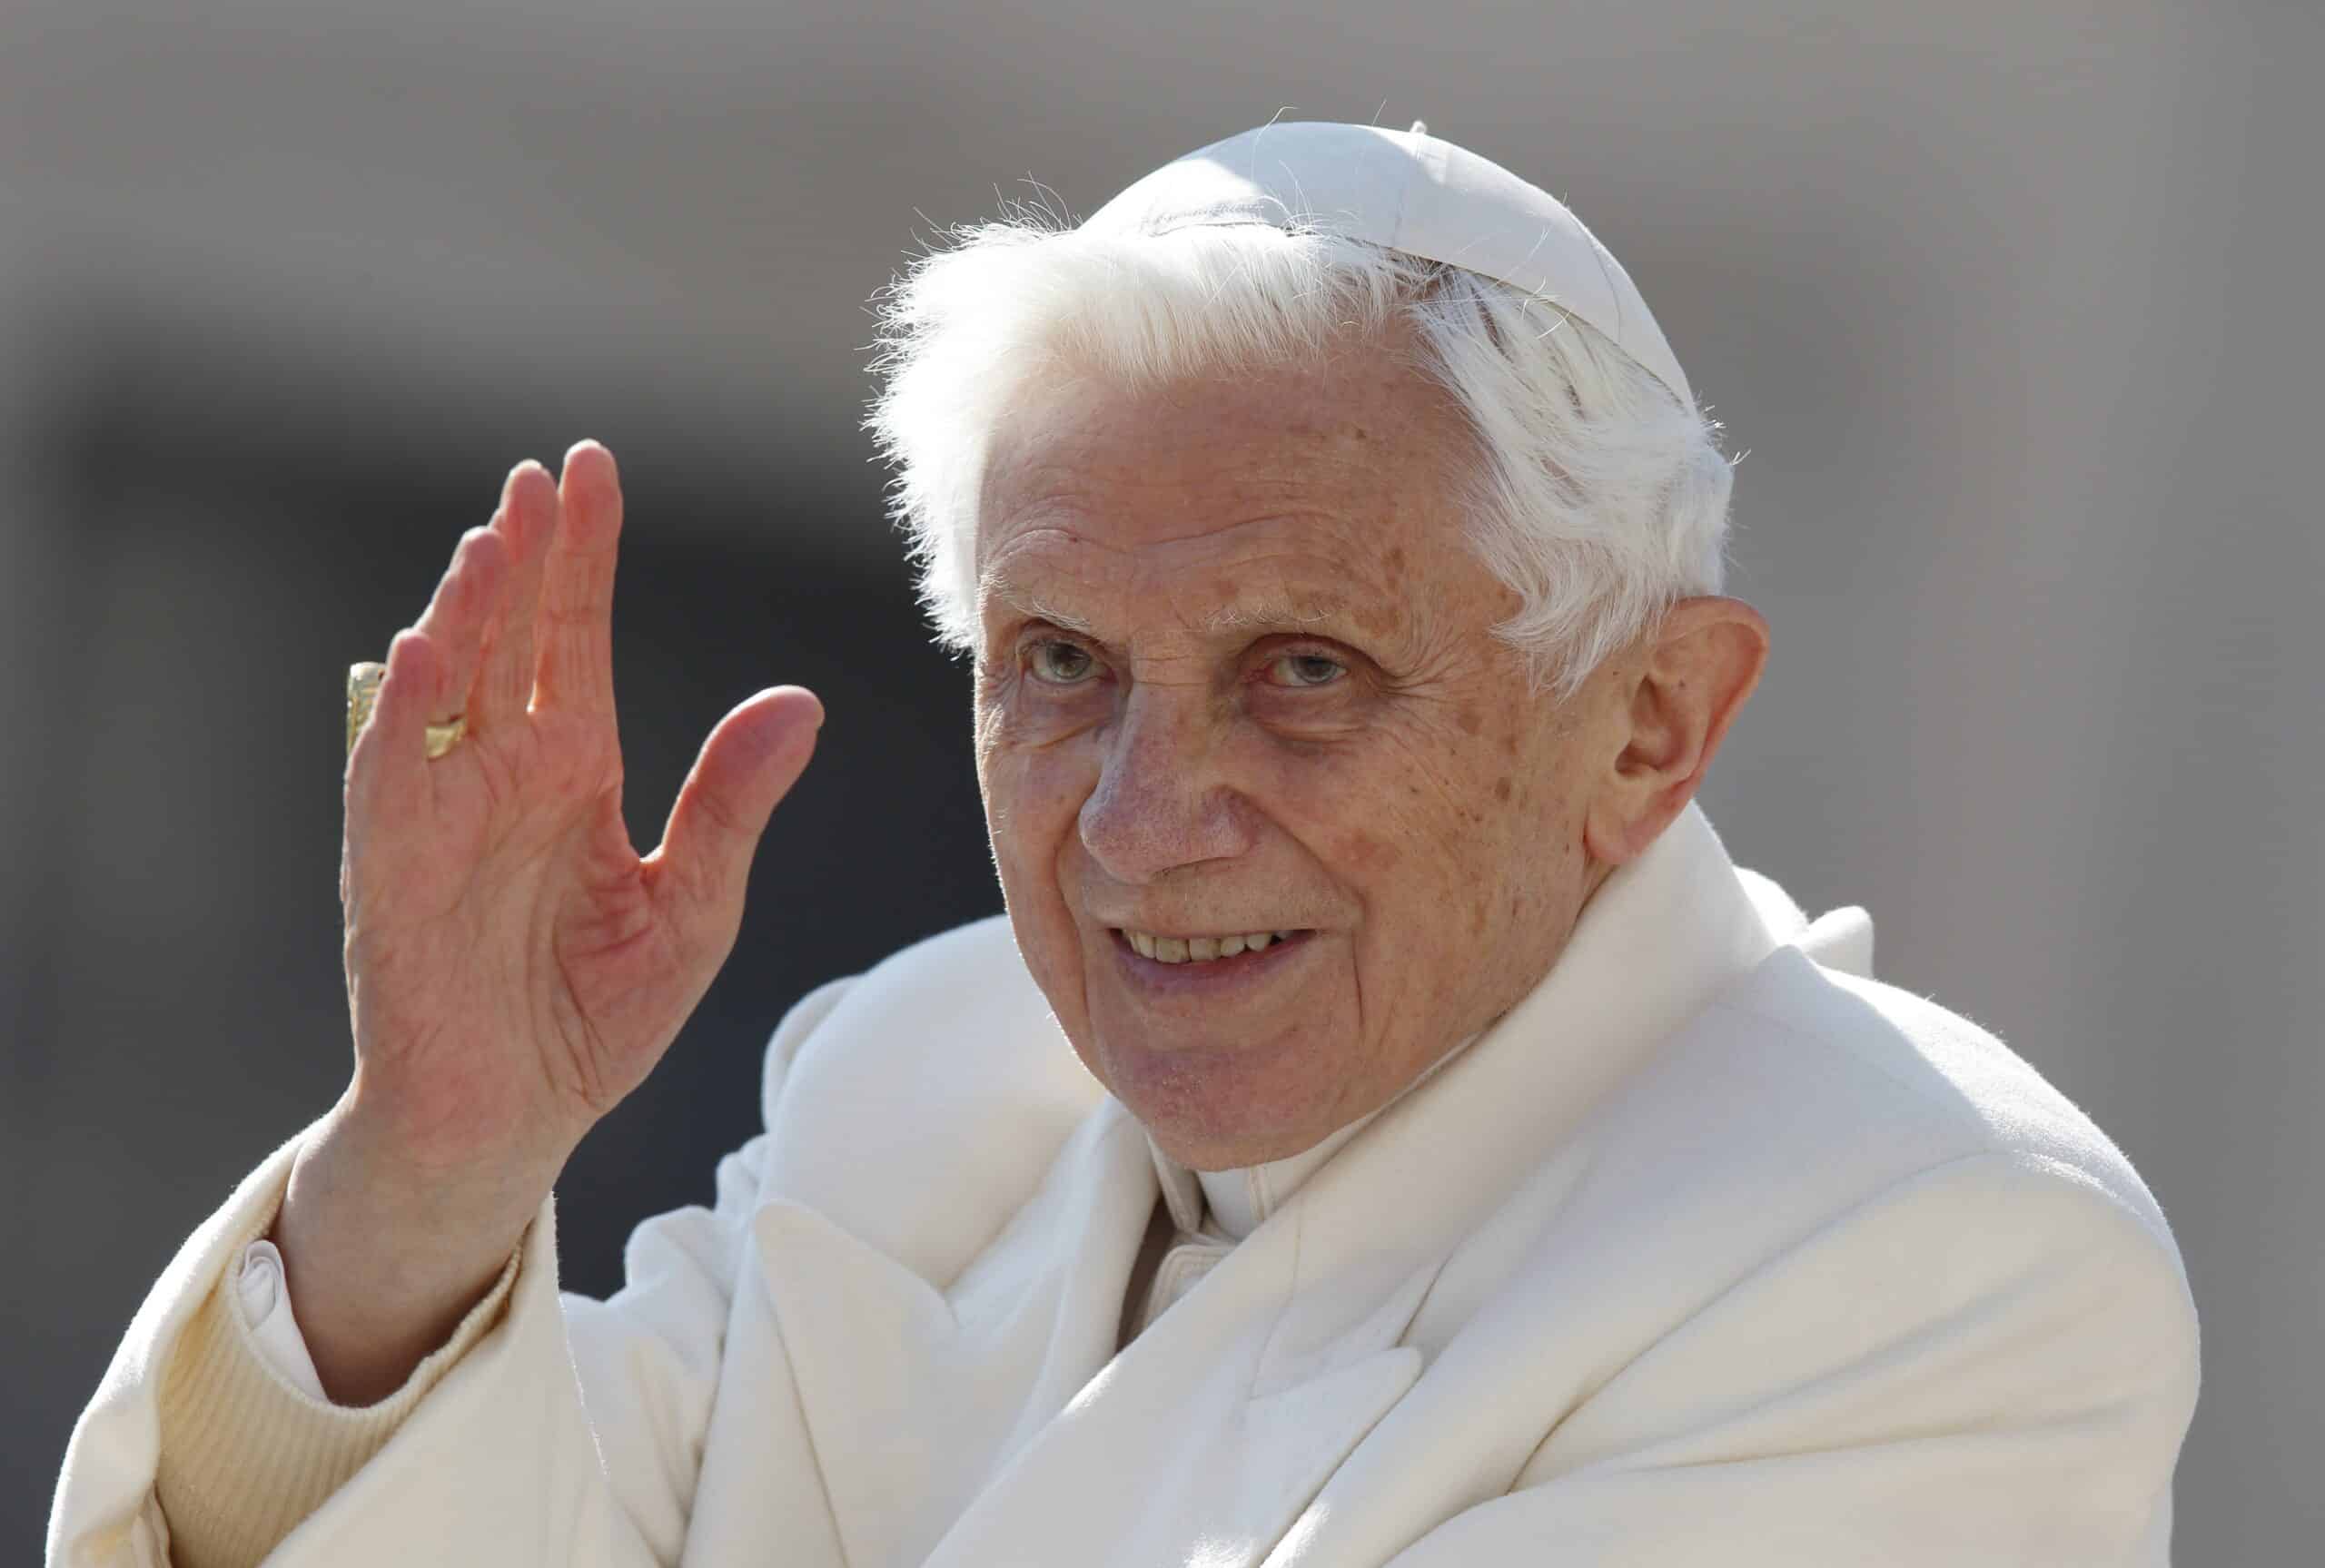 Pope Benedict XVI greets the crowd as he leaves his final general audience in St. Peter's Square at the Vatican Feb. 27, 2013. The pope emeritus died Dec. 31, 2022 at 95. (CNS photo/Paul Haring)